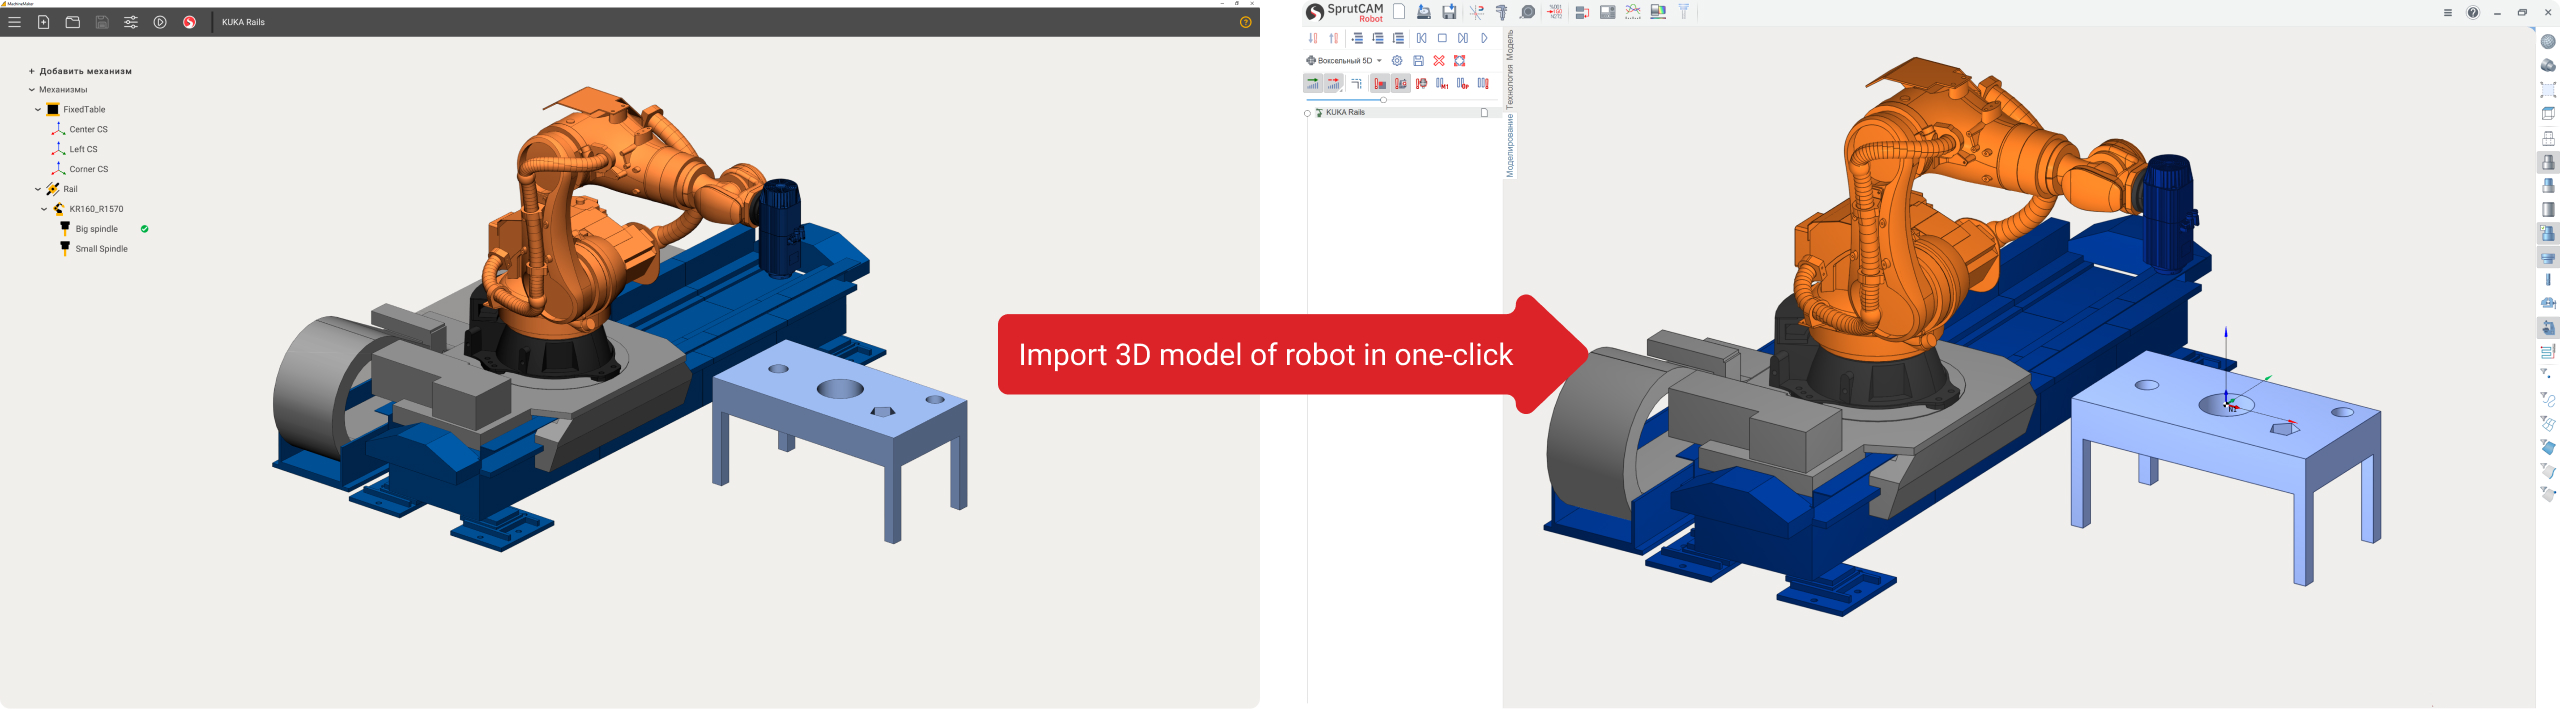 Import 3D model of robot in one-click